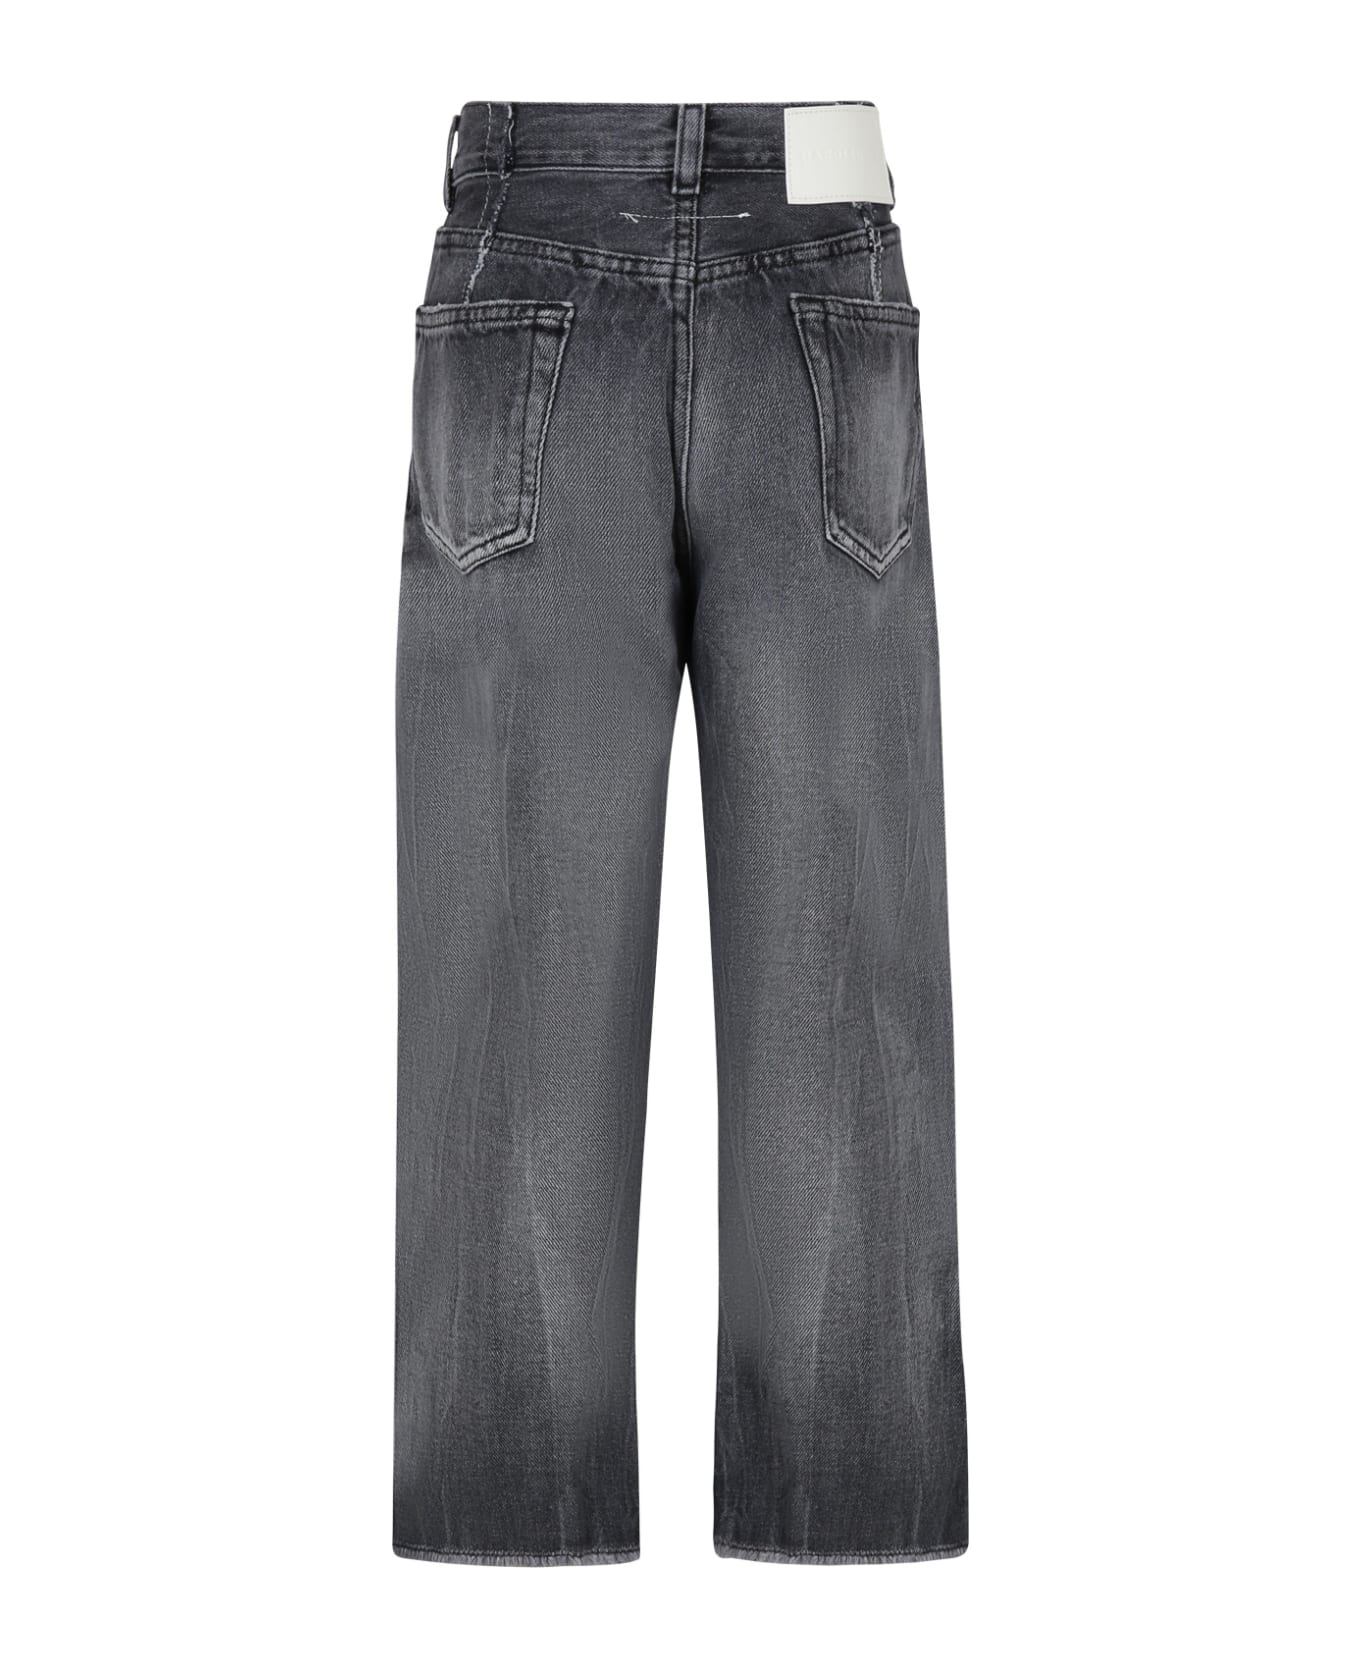 MM6 Maison Margiela Gray Jeans For Kids With Logo - Grey